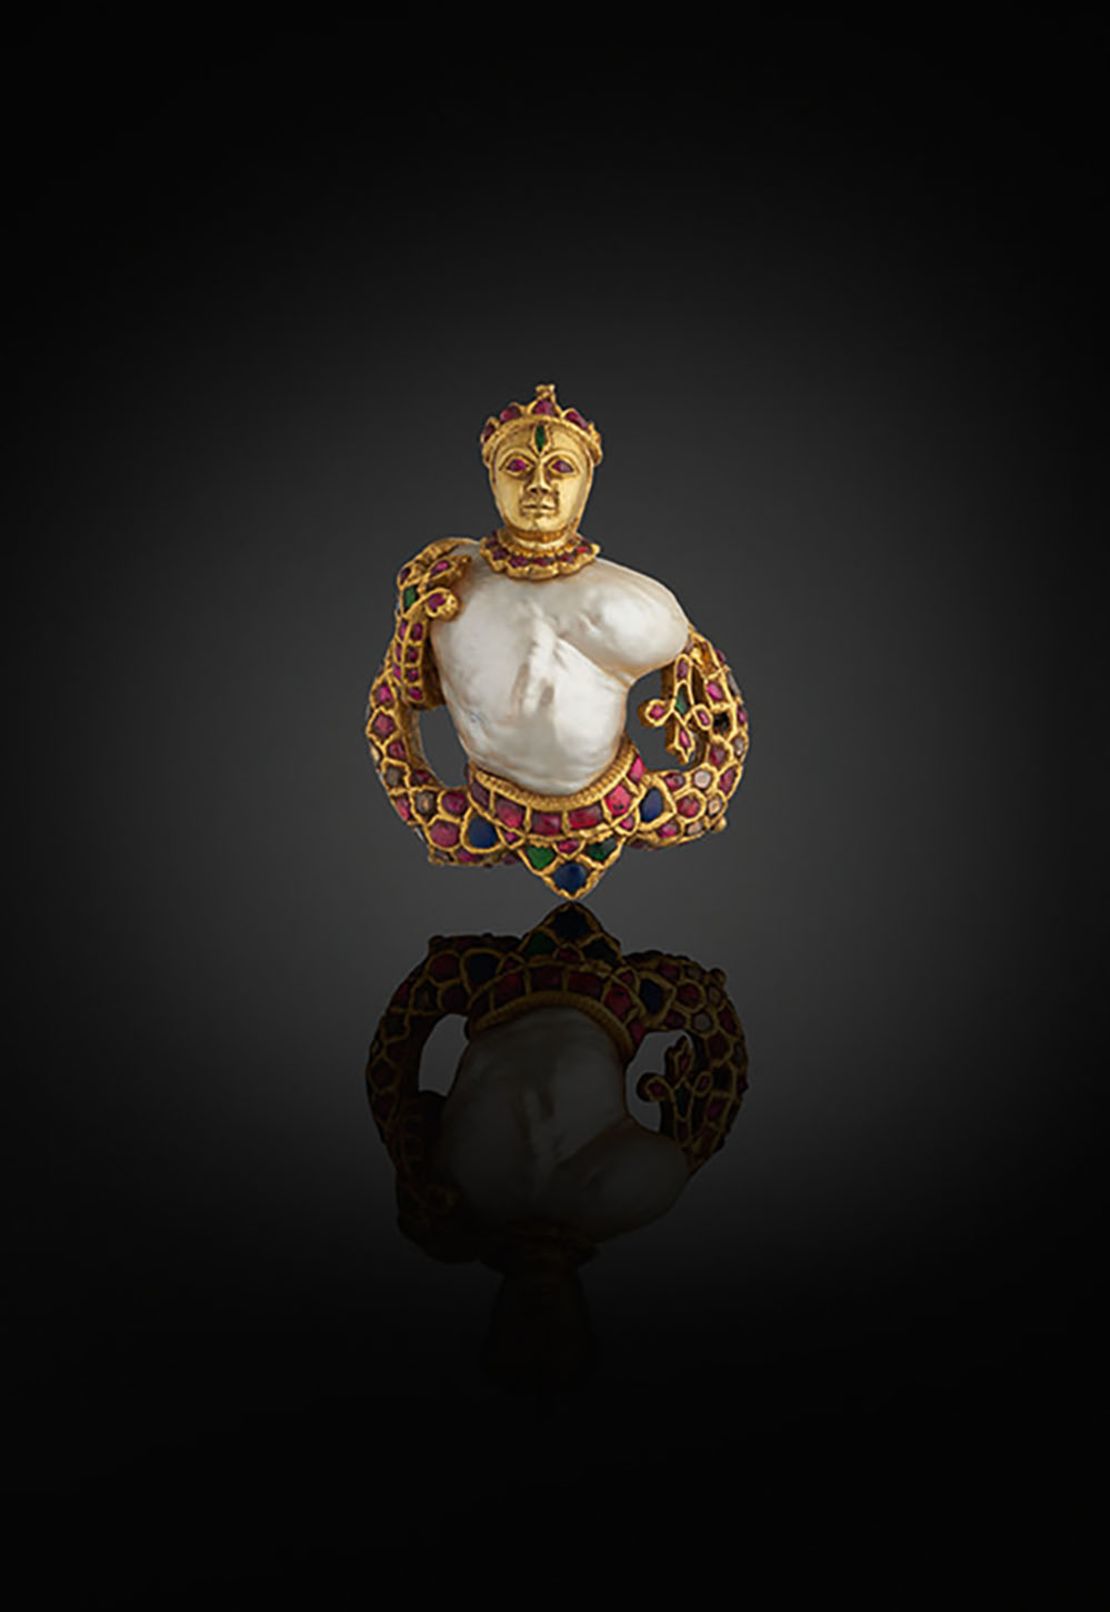 An Indian pendant inspired by European jewelry traditions.